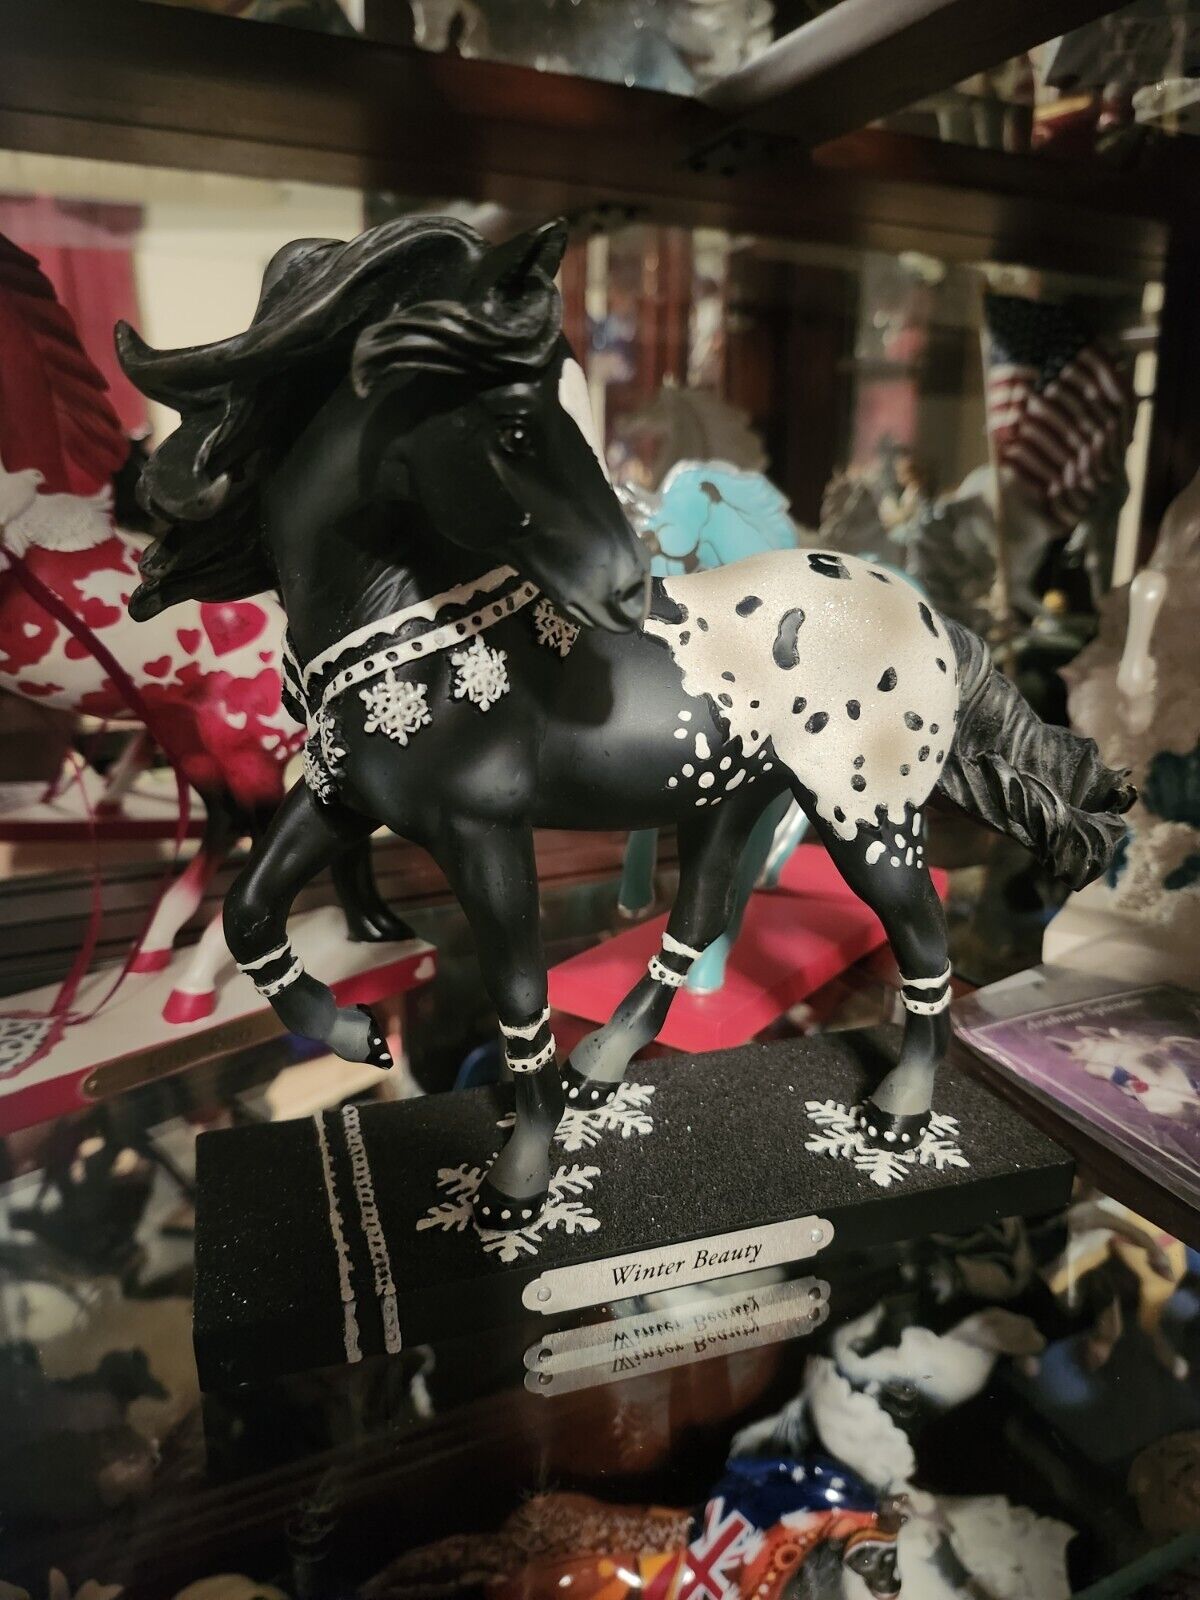 Trail Of Painted Ponies Winter Beauty 1st Edition